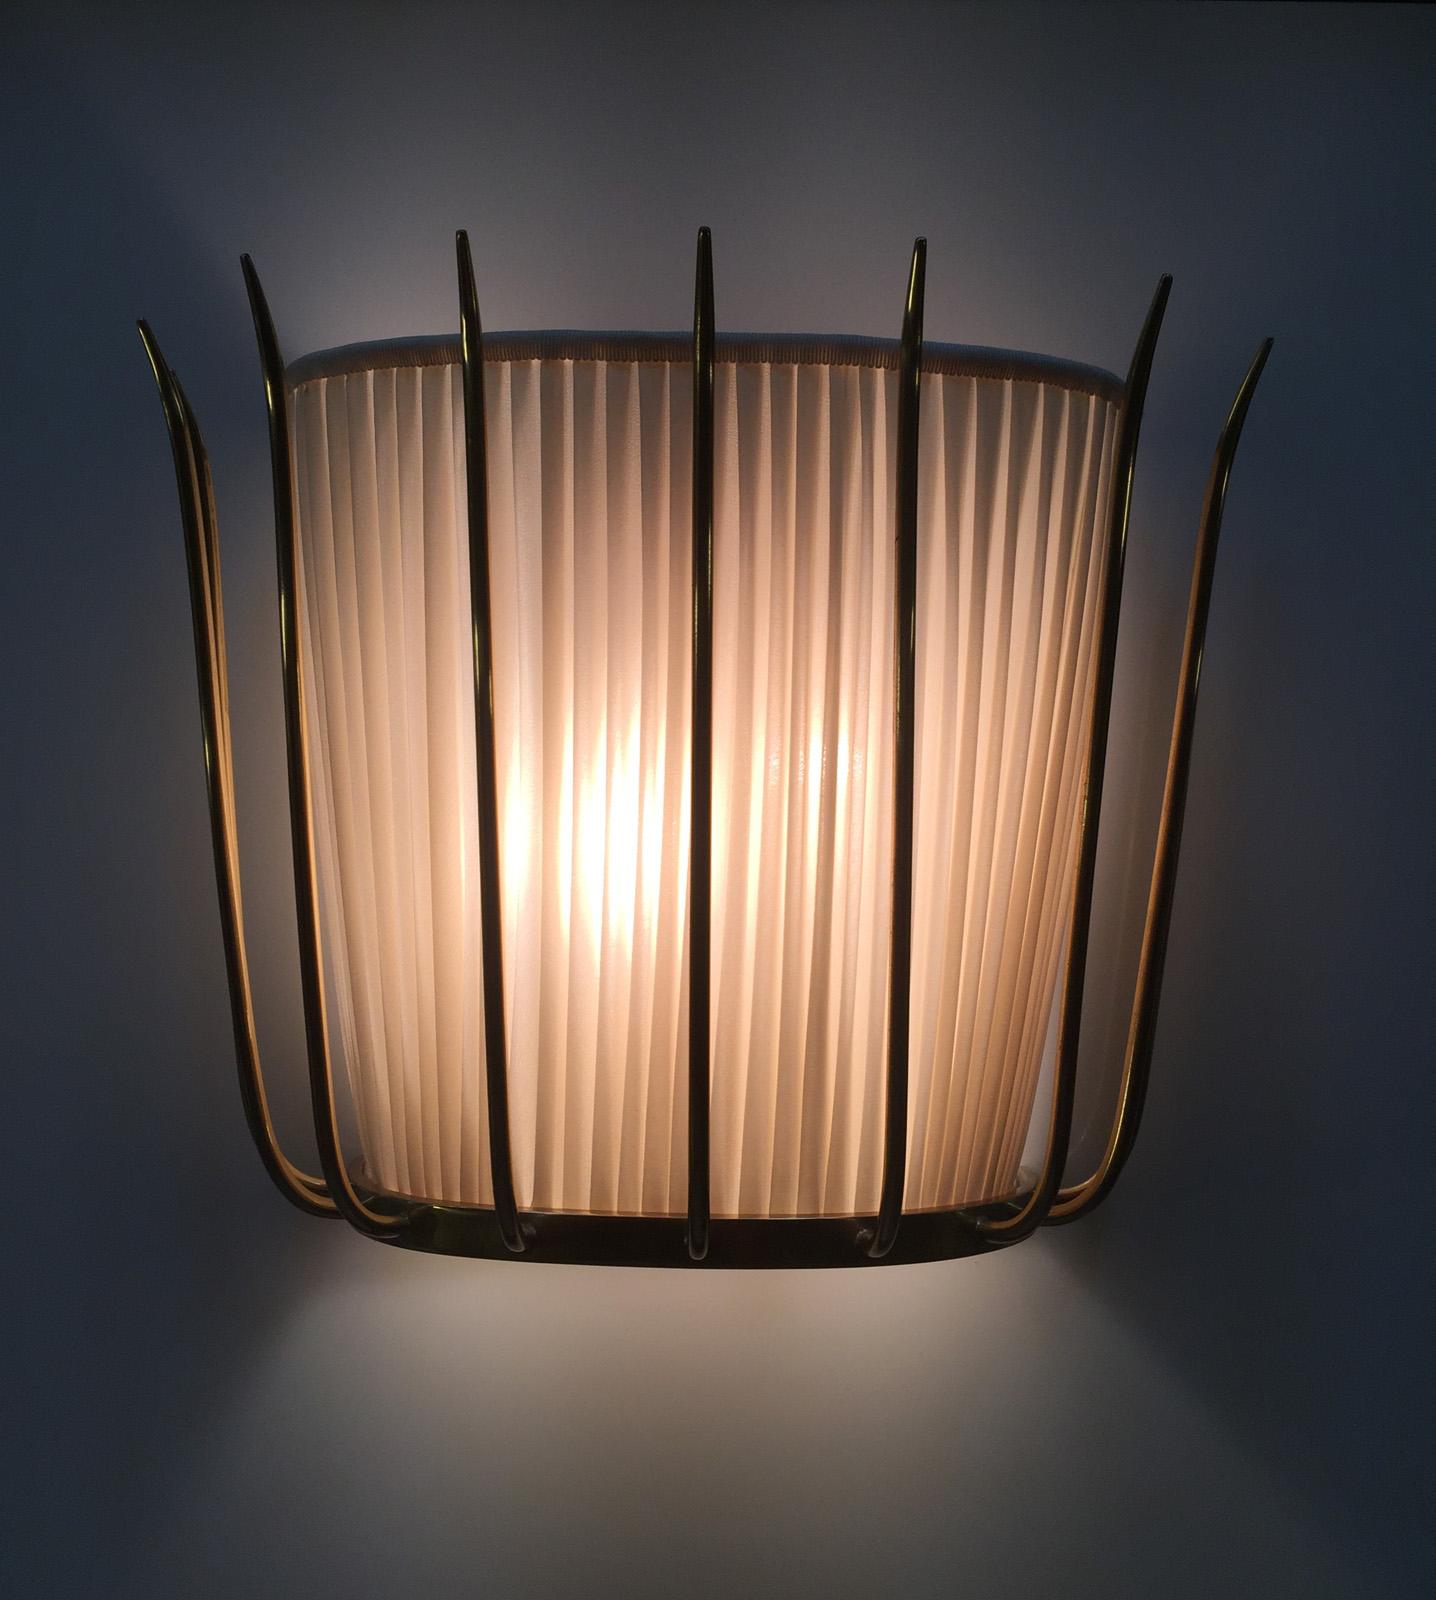 A pretty and charming wall lamp with a pleated shade.

Most components according to the UL regulations, with an additional charge we will UL-list and label our fixtures.

